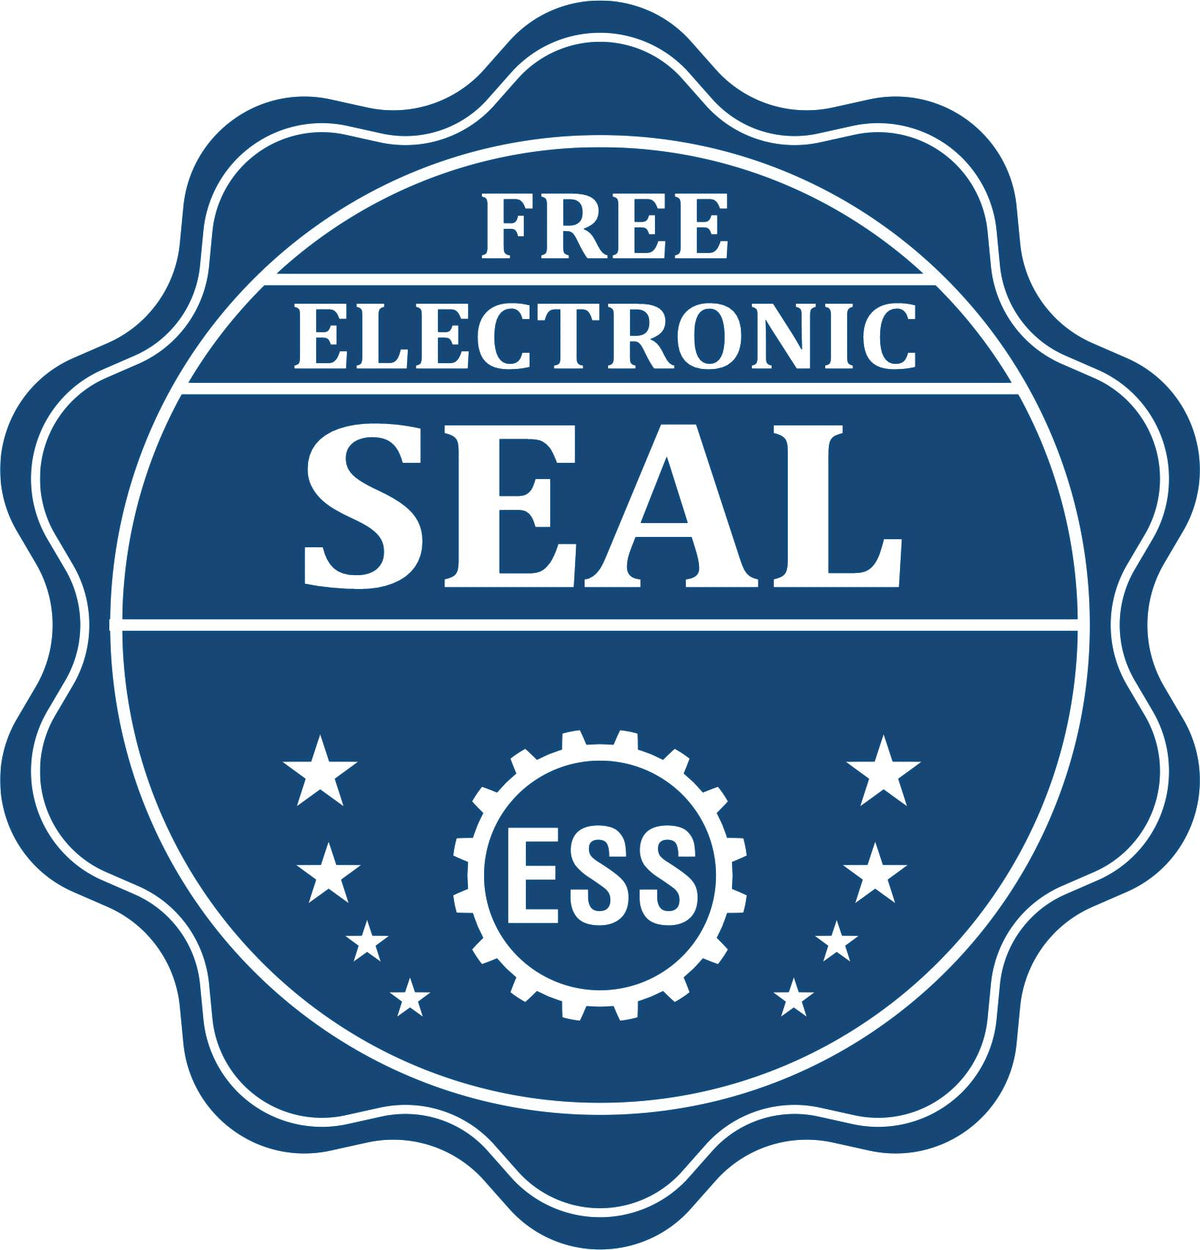 A badge showing a free electronic seal for the Hybrid Nebraska Engineer Seal with stars and the ESS gear on the emblem.